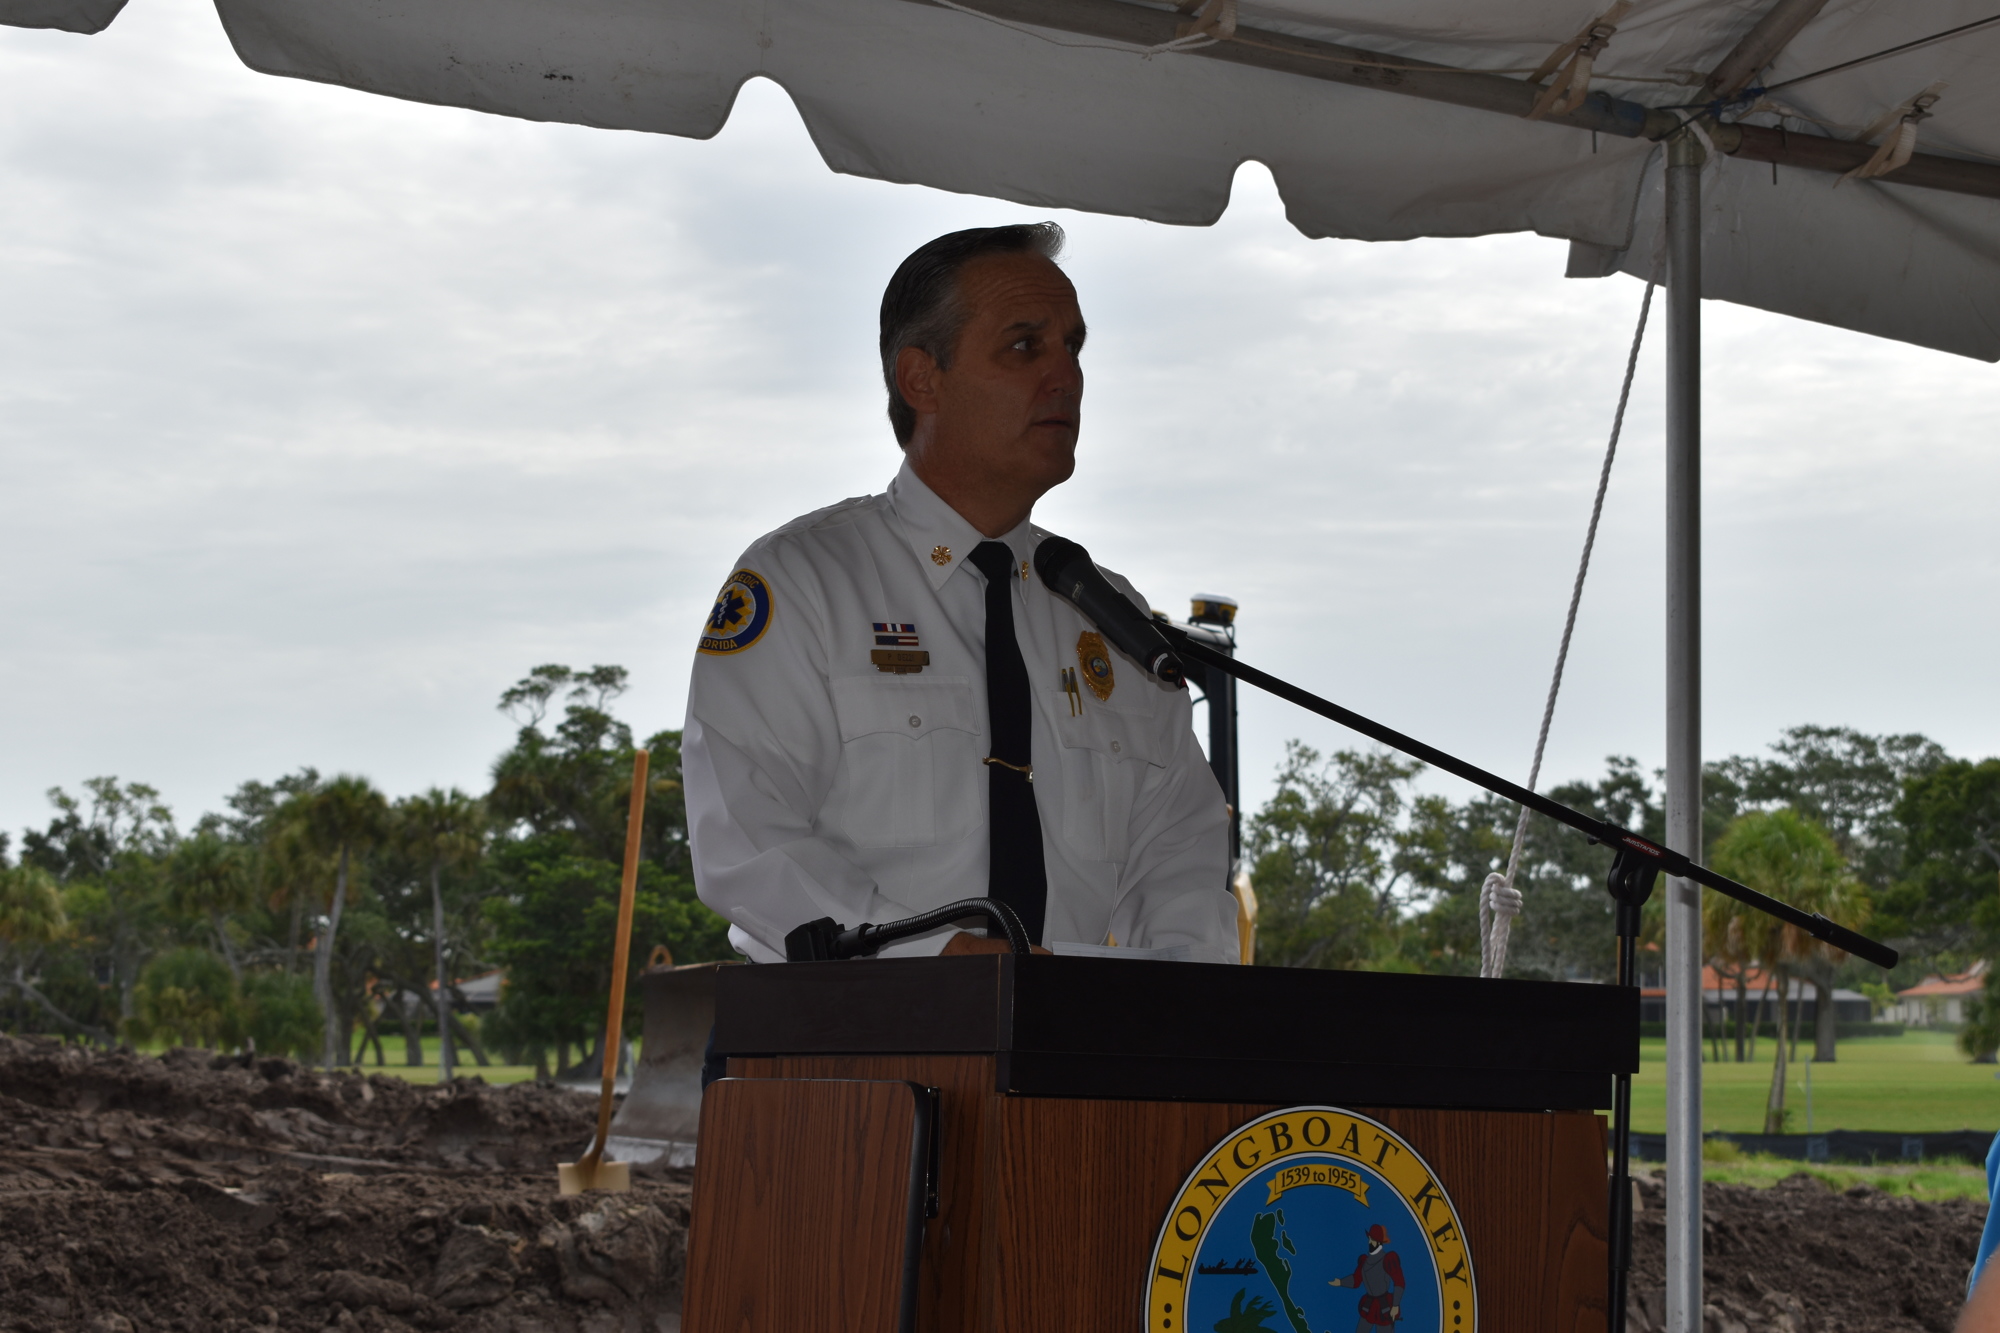 Fire Chief Paul Dezzi was among those who spoke in July at the groundbreaking for the new Station 92.